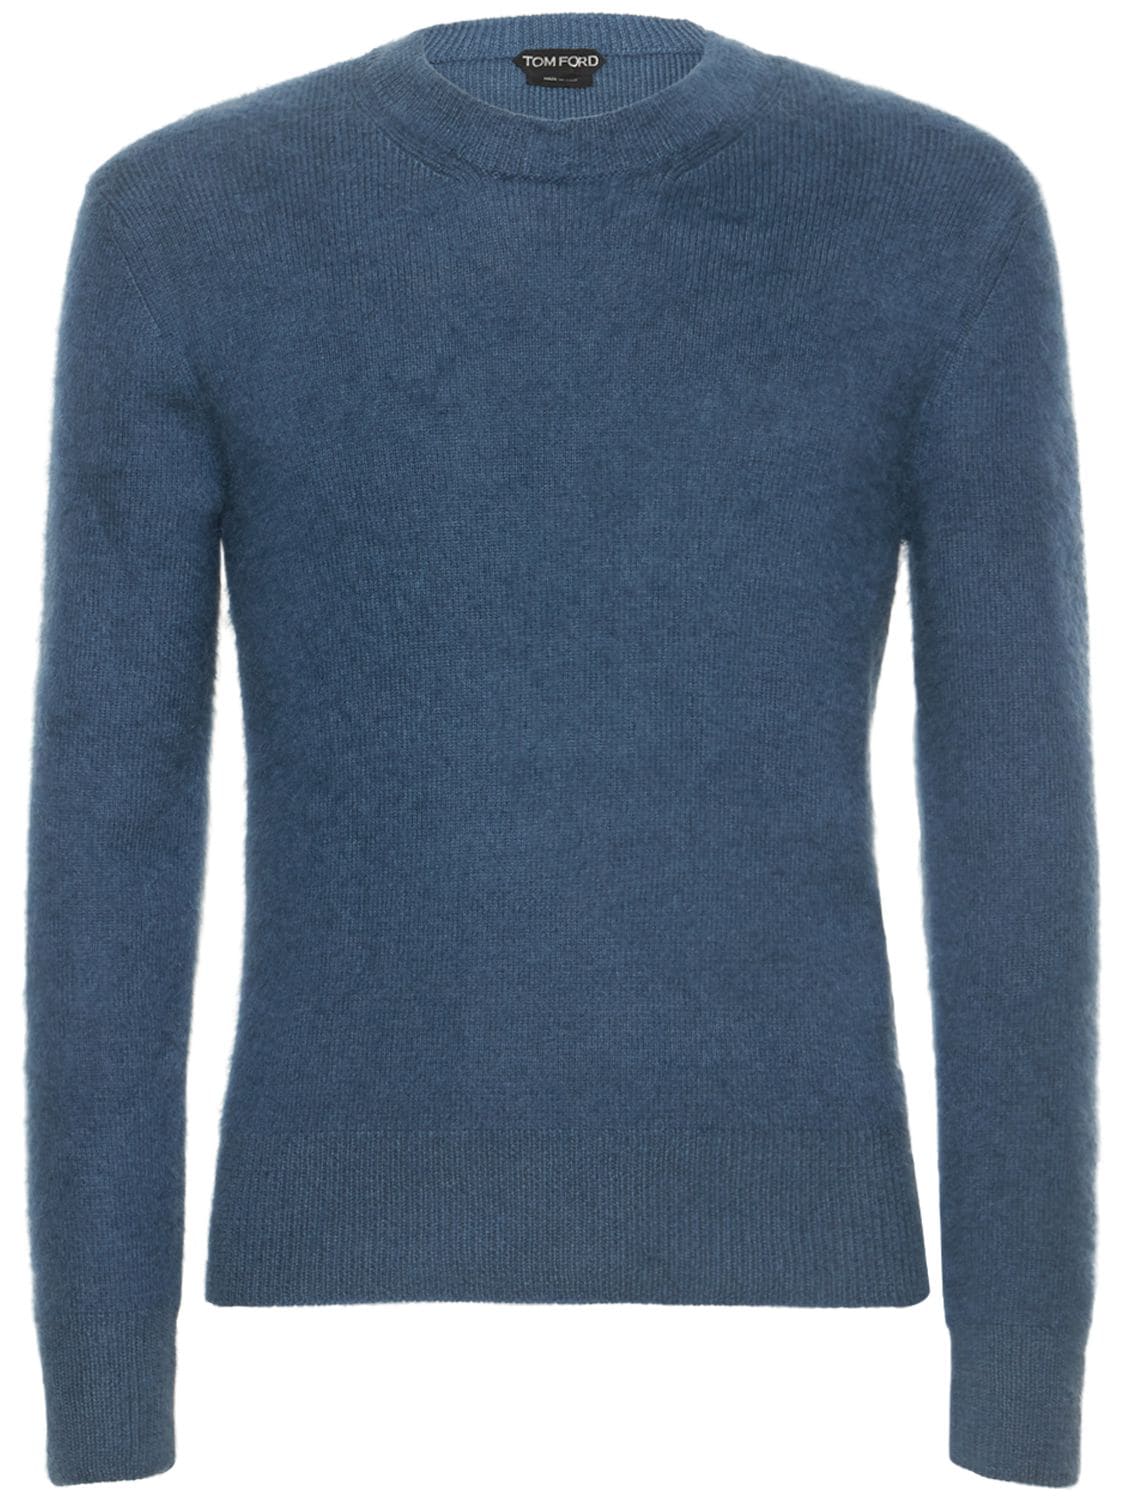 Tom Ford Crewneck Wool Blend Knit Sweater In Blue